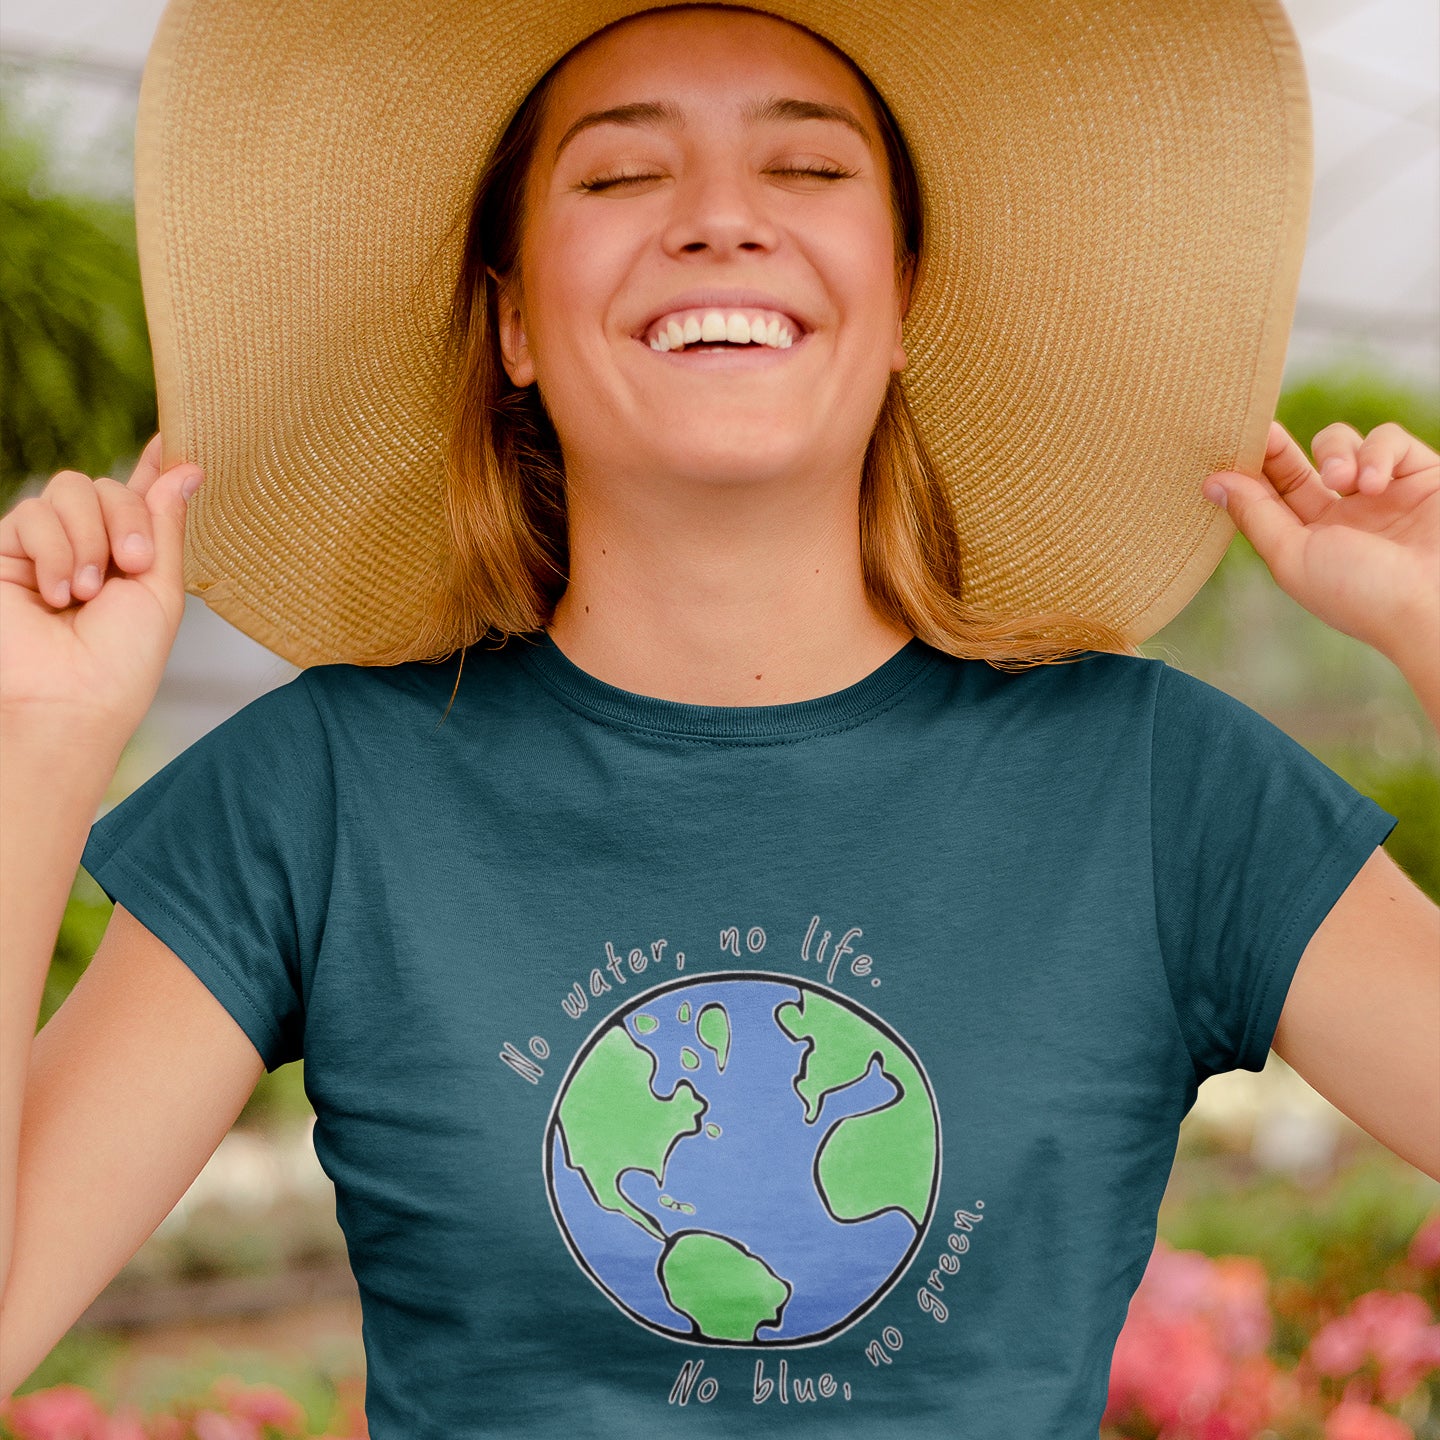 girl in greenhouse with flowers and sunhat wearing Connected Clothing Company "No Blue No Green" tshirt - 10% of profits give back to non-profit organizations - ethically and sustainably made clothing